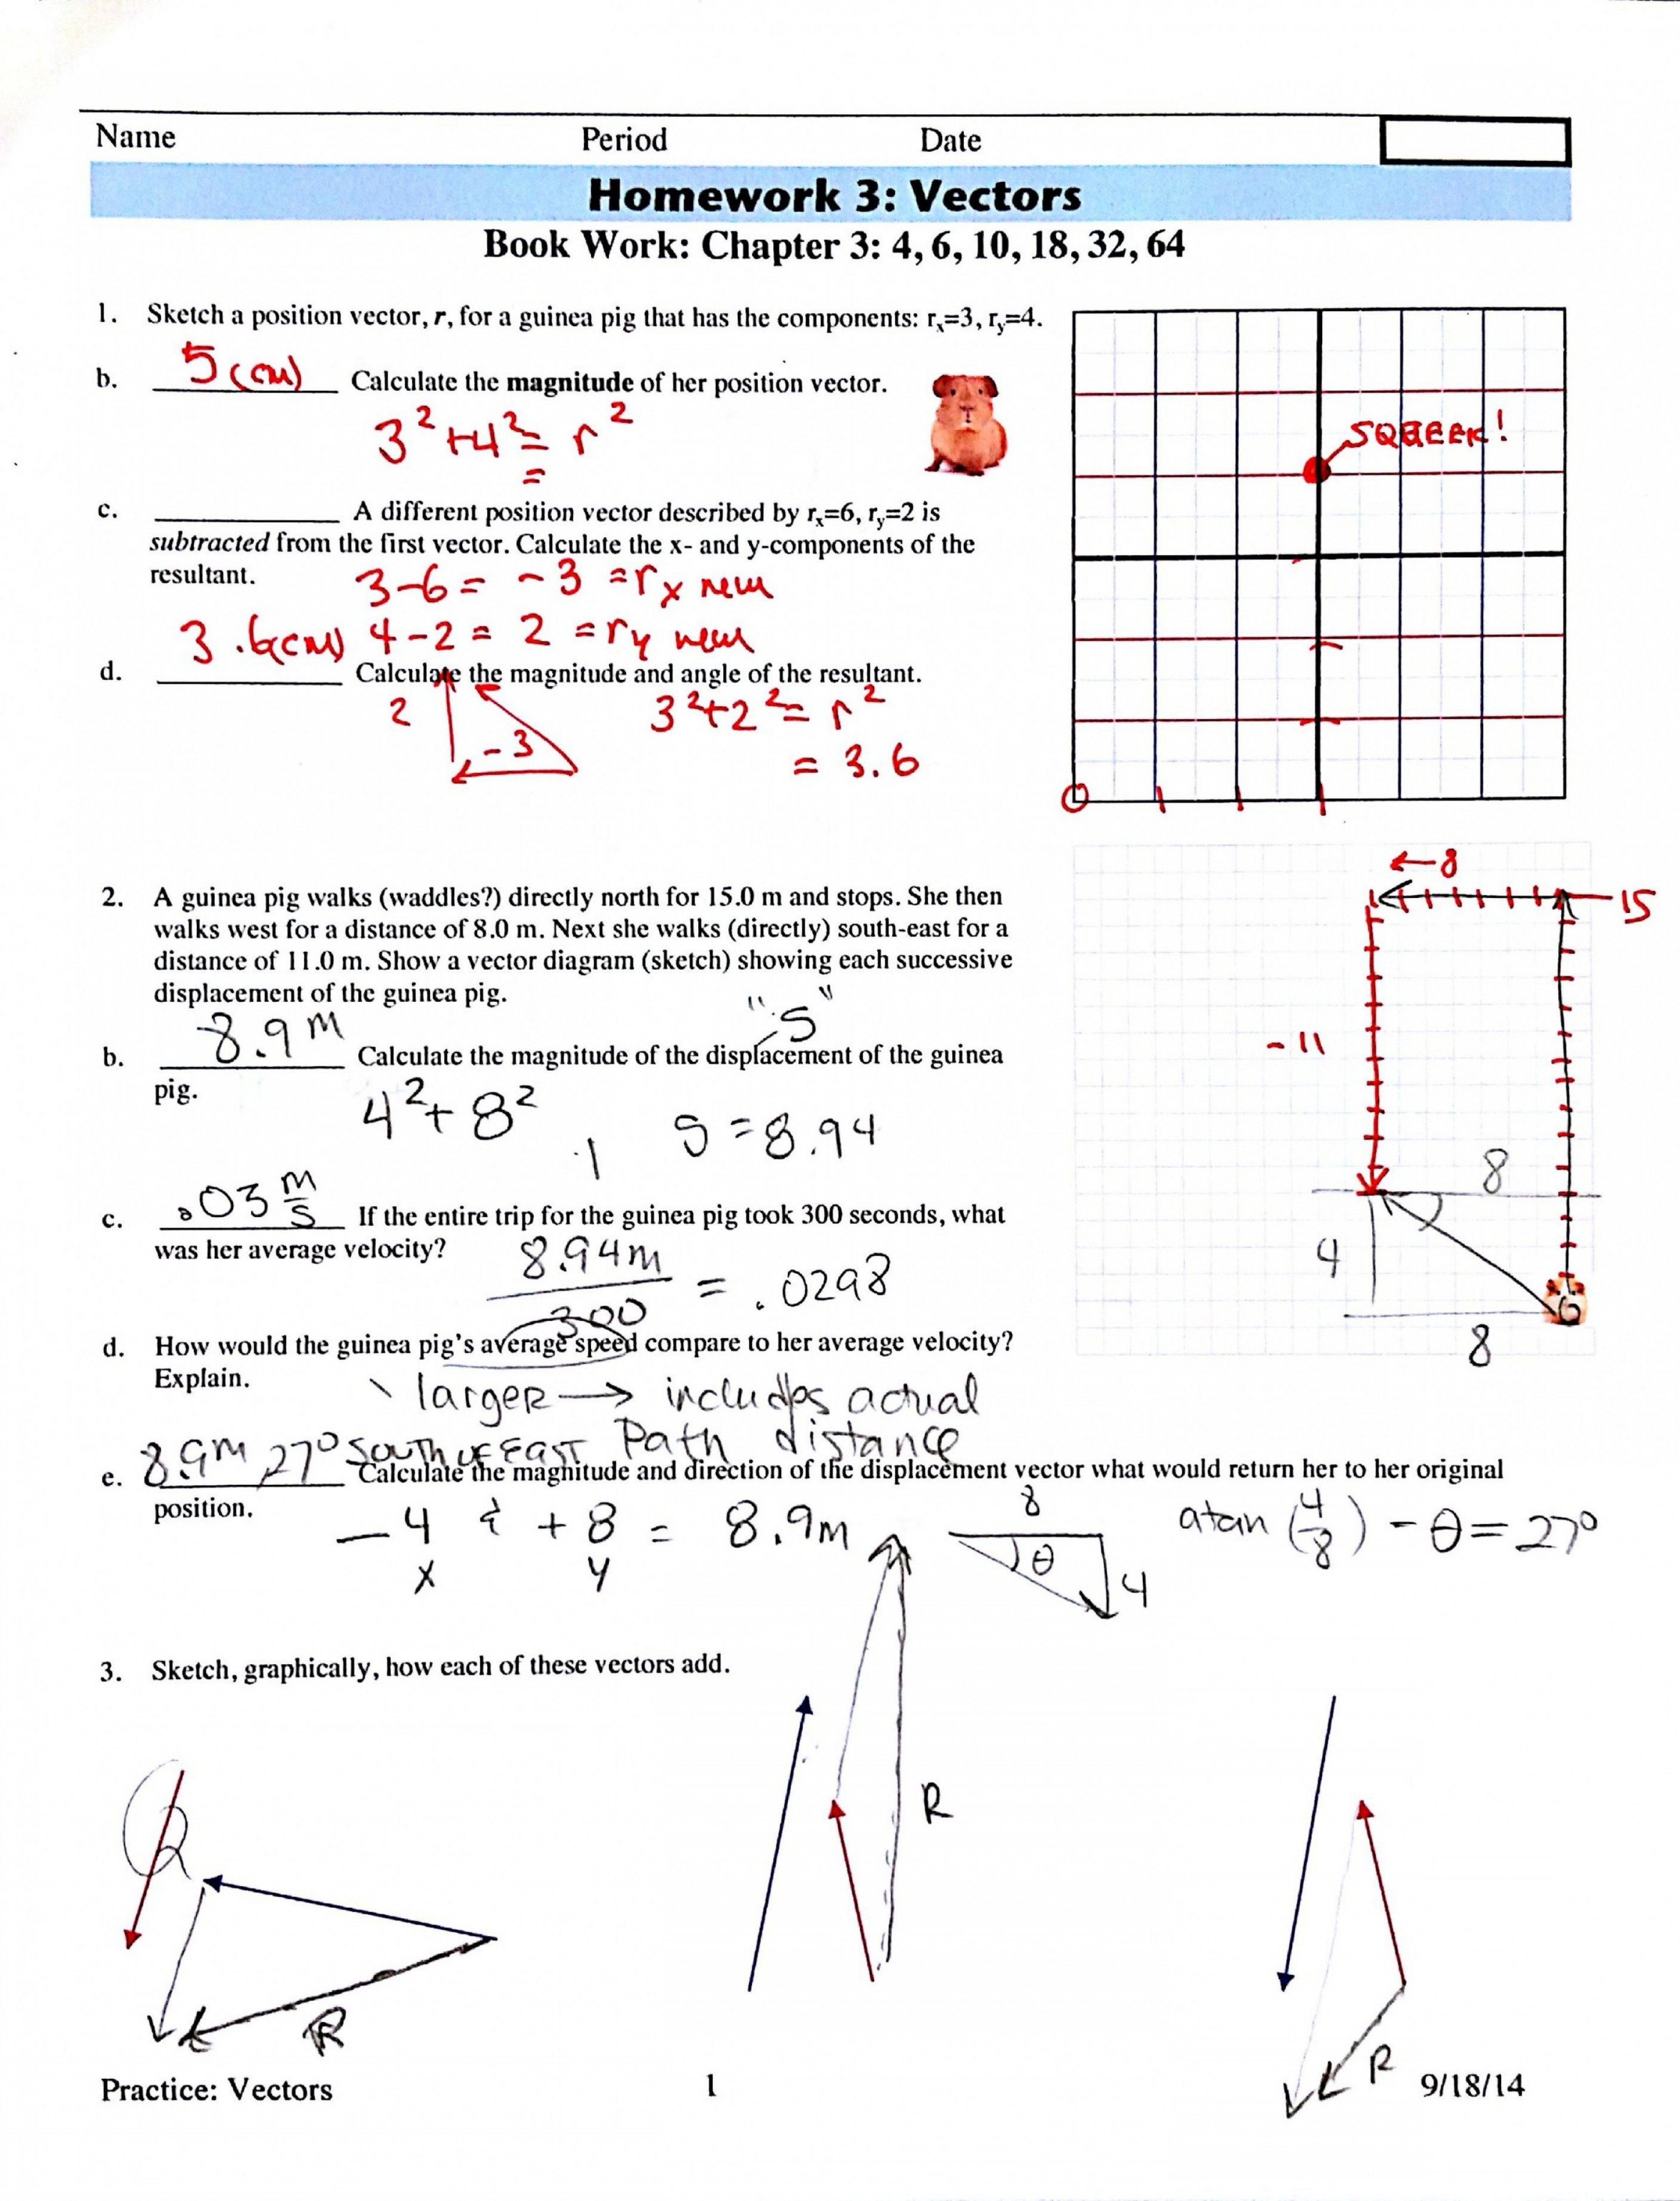 Top Vector Addition Worksheet With Answers Image L Ca  Cqrecords Or Vectors Worksheet With Answers